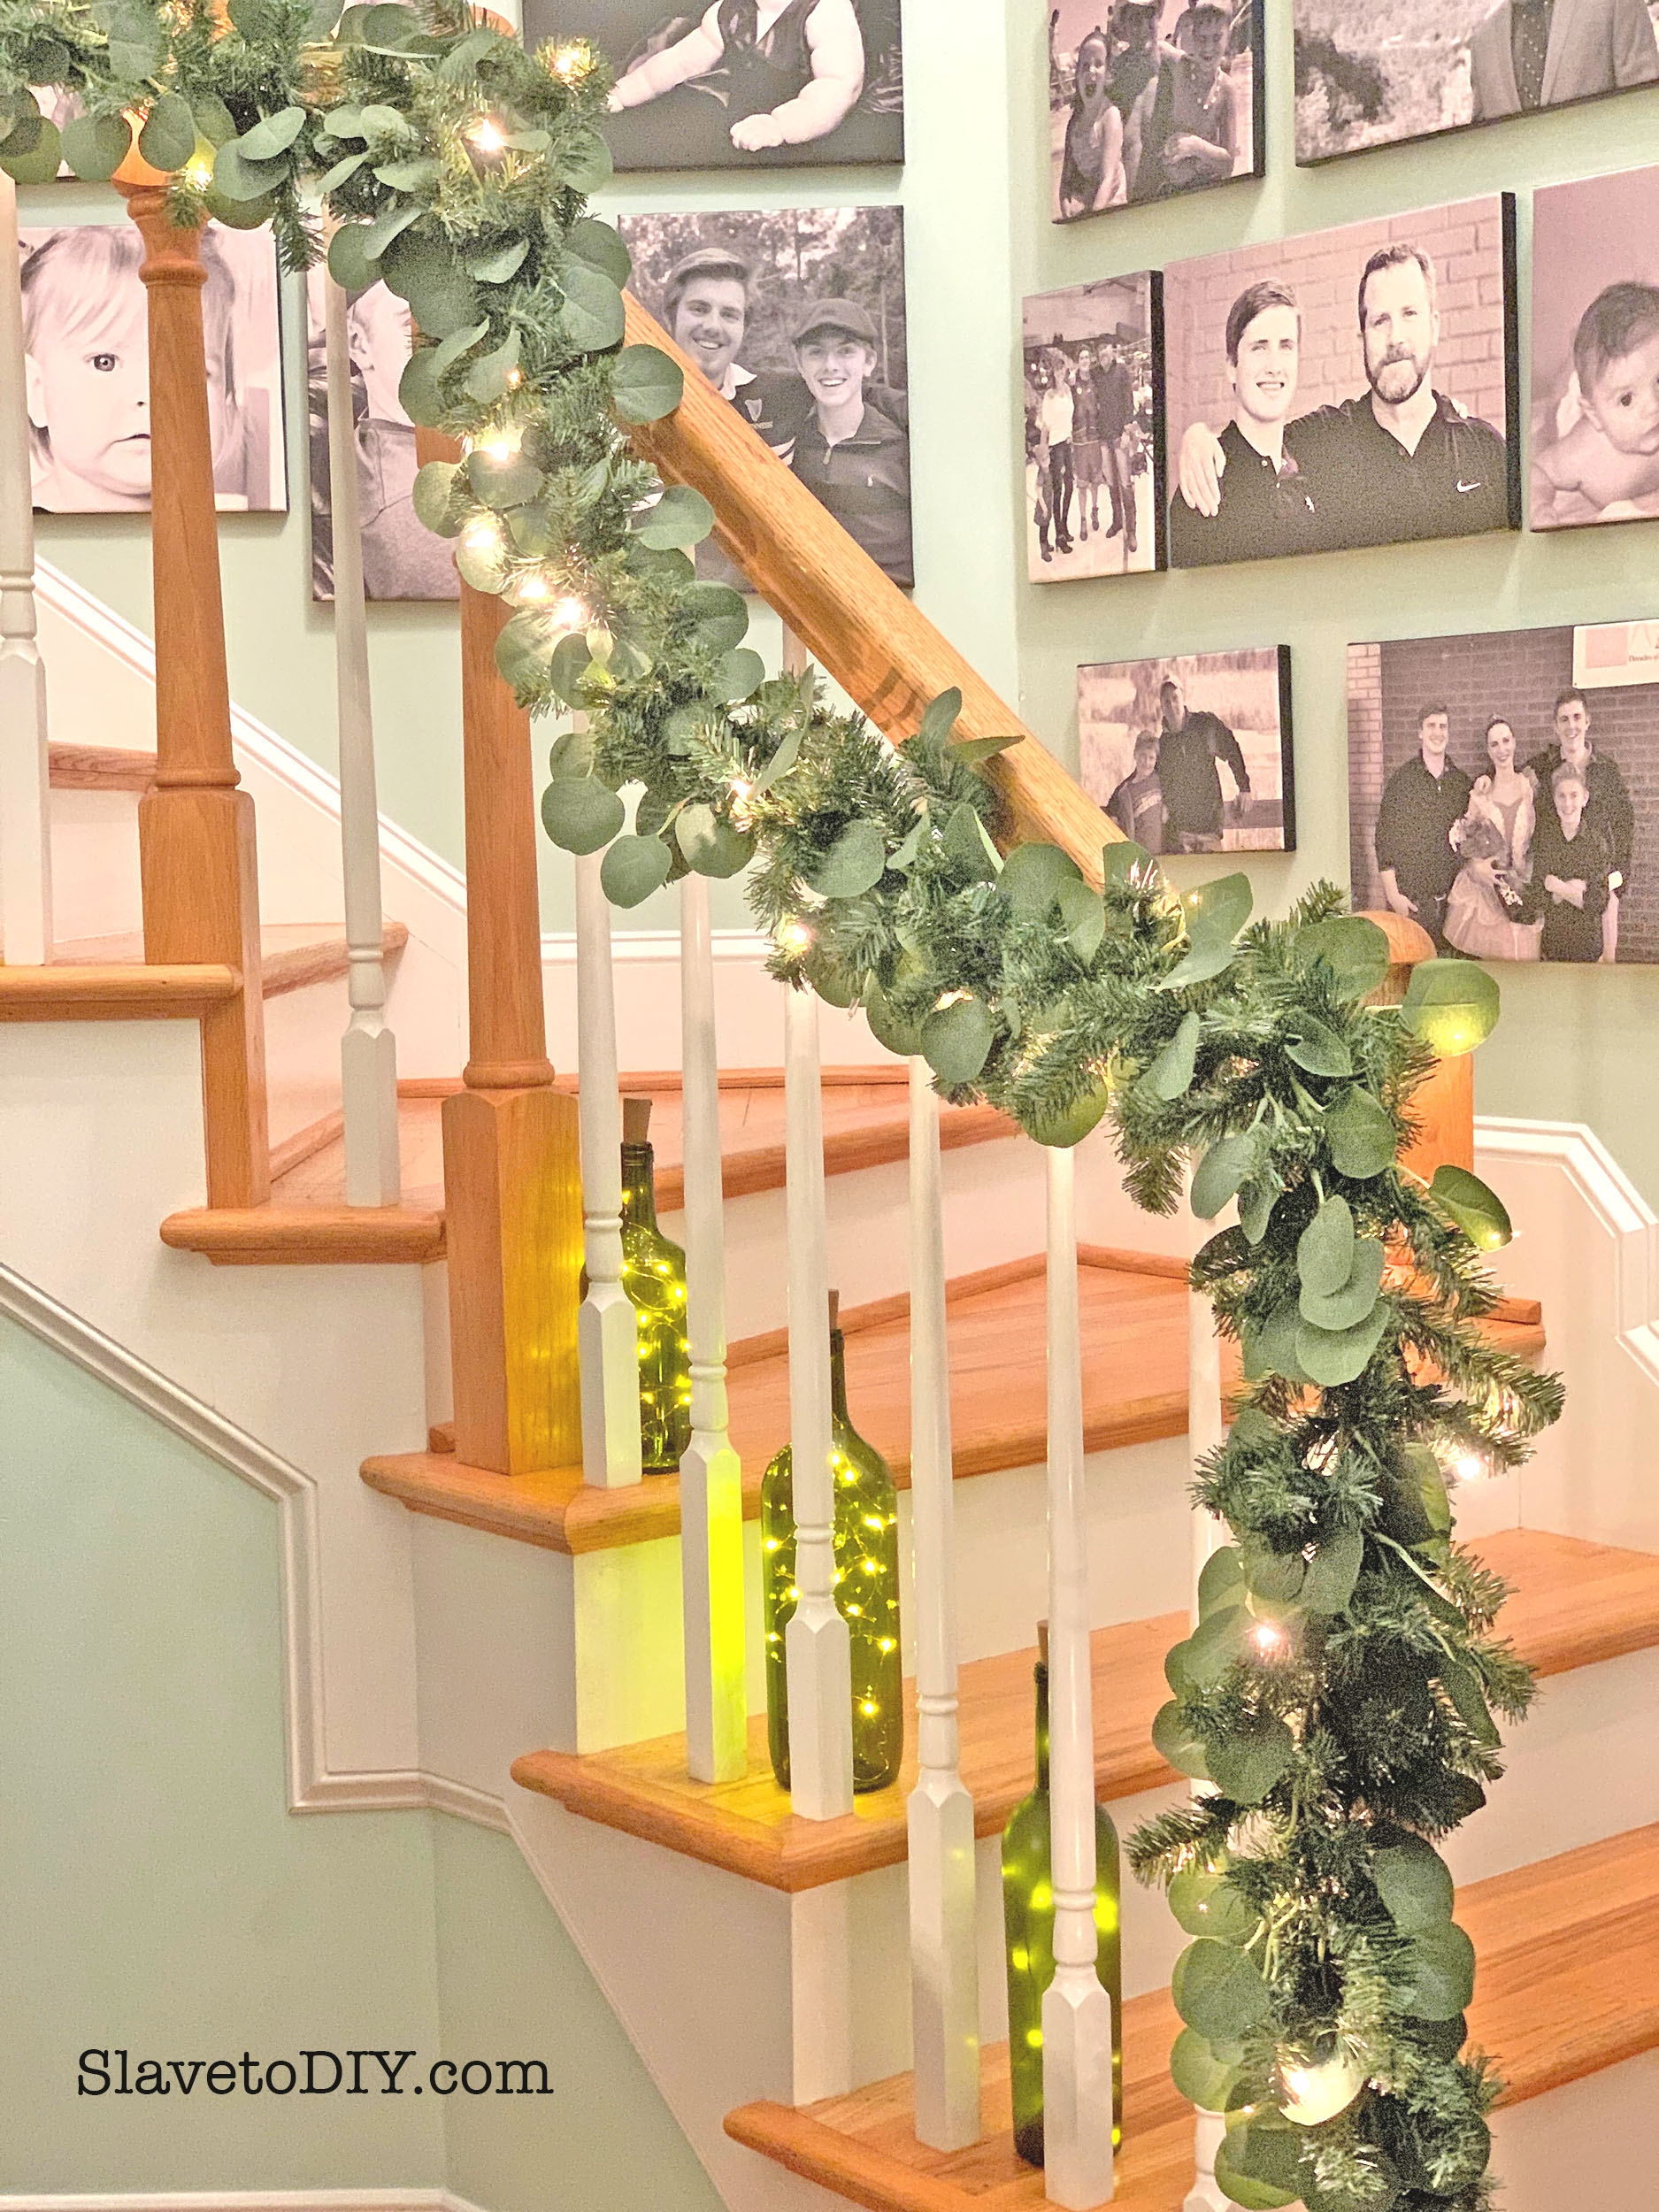 Faux Garland For Your Mantel and Banister - Cottage and Vine